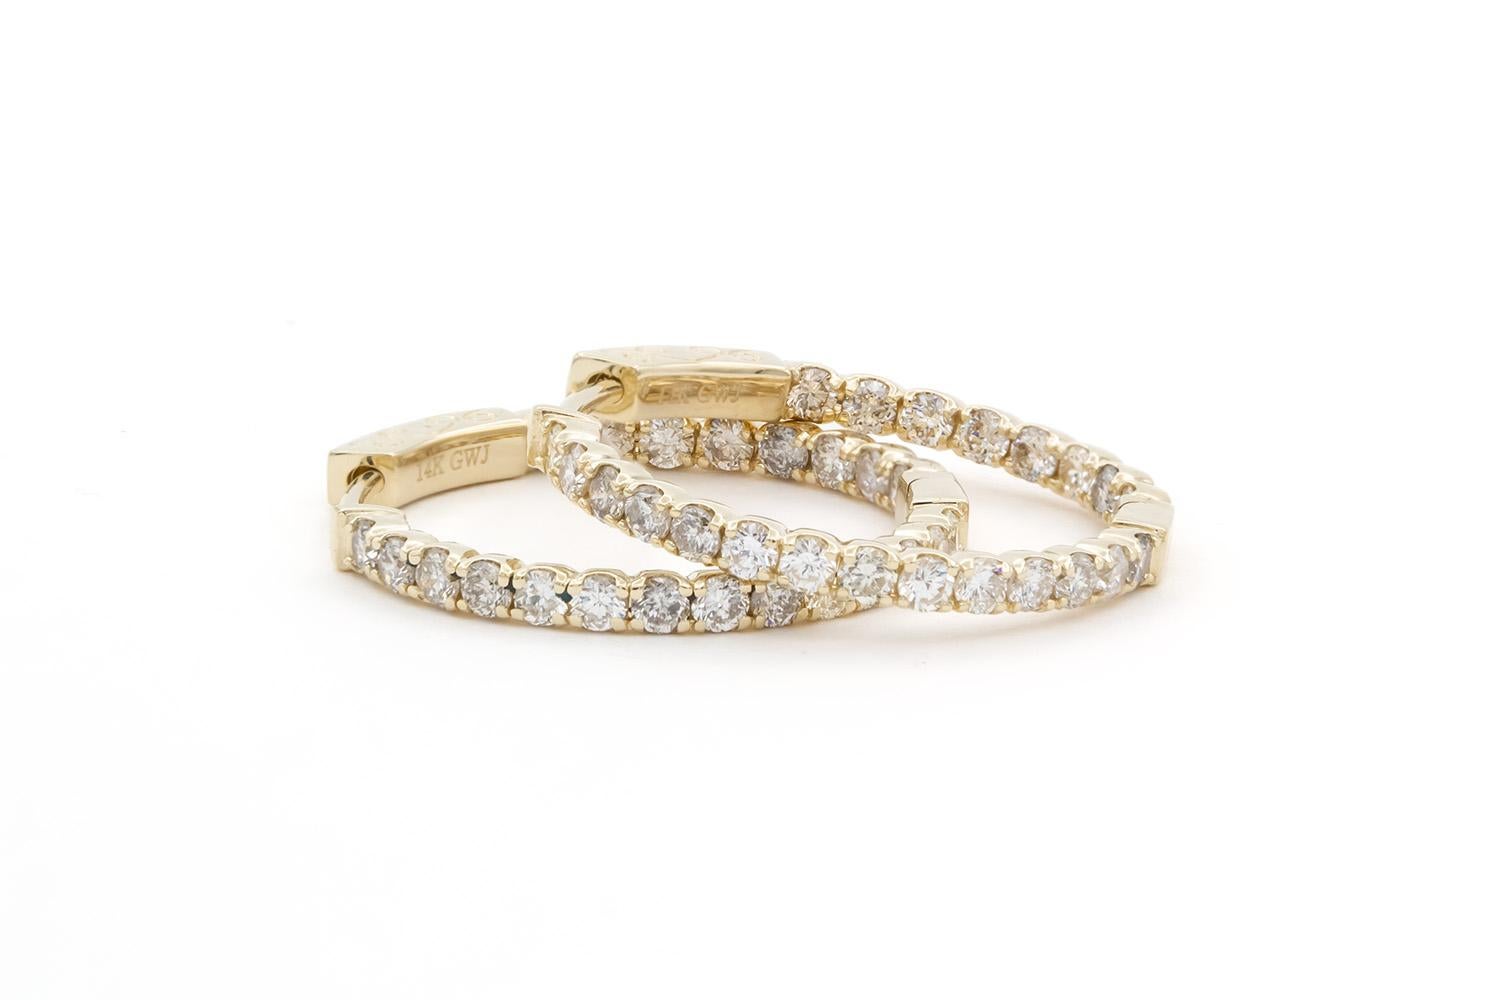 We are pleased to offer these Brand New Unworn 14k Yellow Gold & Diamond Inside-Outside 1 Inch Hoop Earrings. These stunning earrings are fun and vibrant! They feature 1.54ctw G-H/VS-SI round brilliant cut diamonds set in 14k yellow gold 1 inch